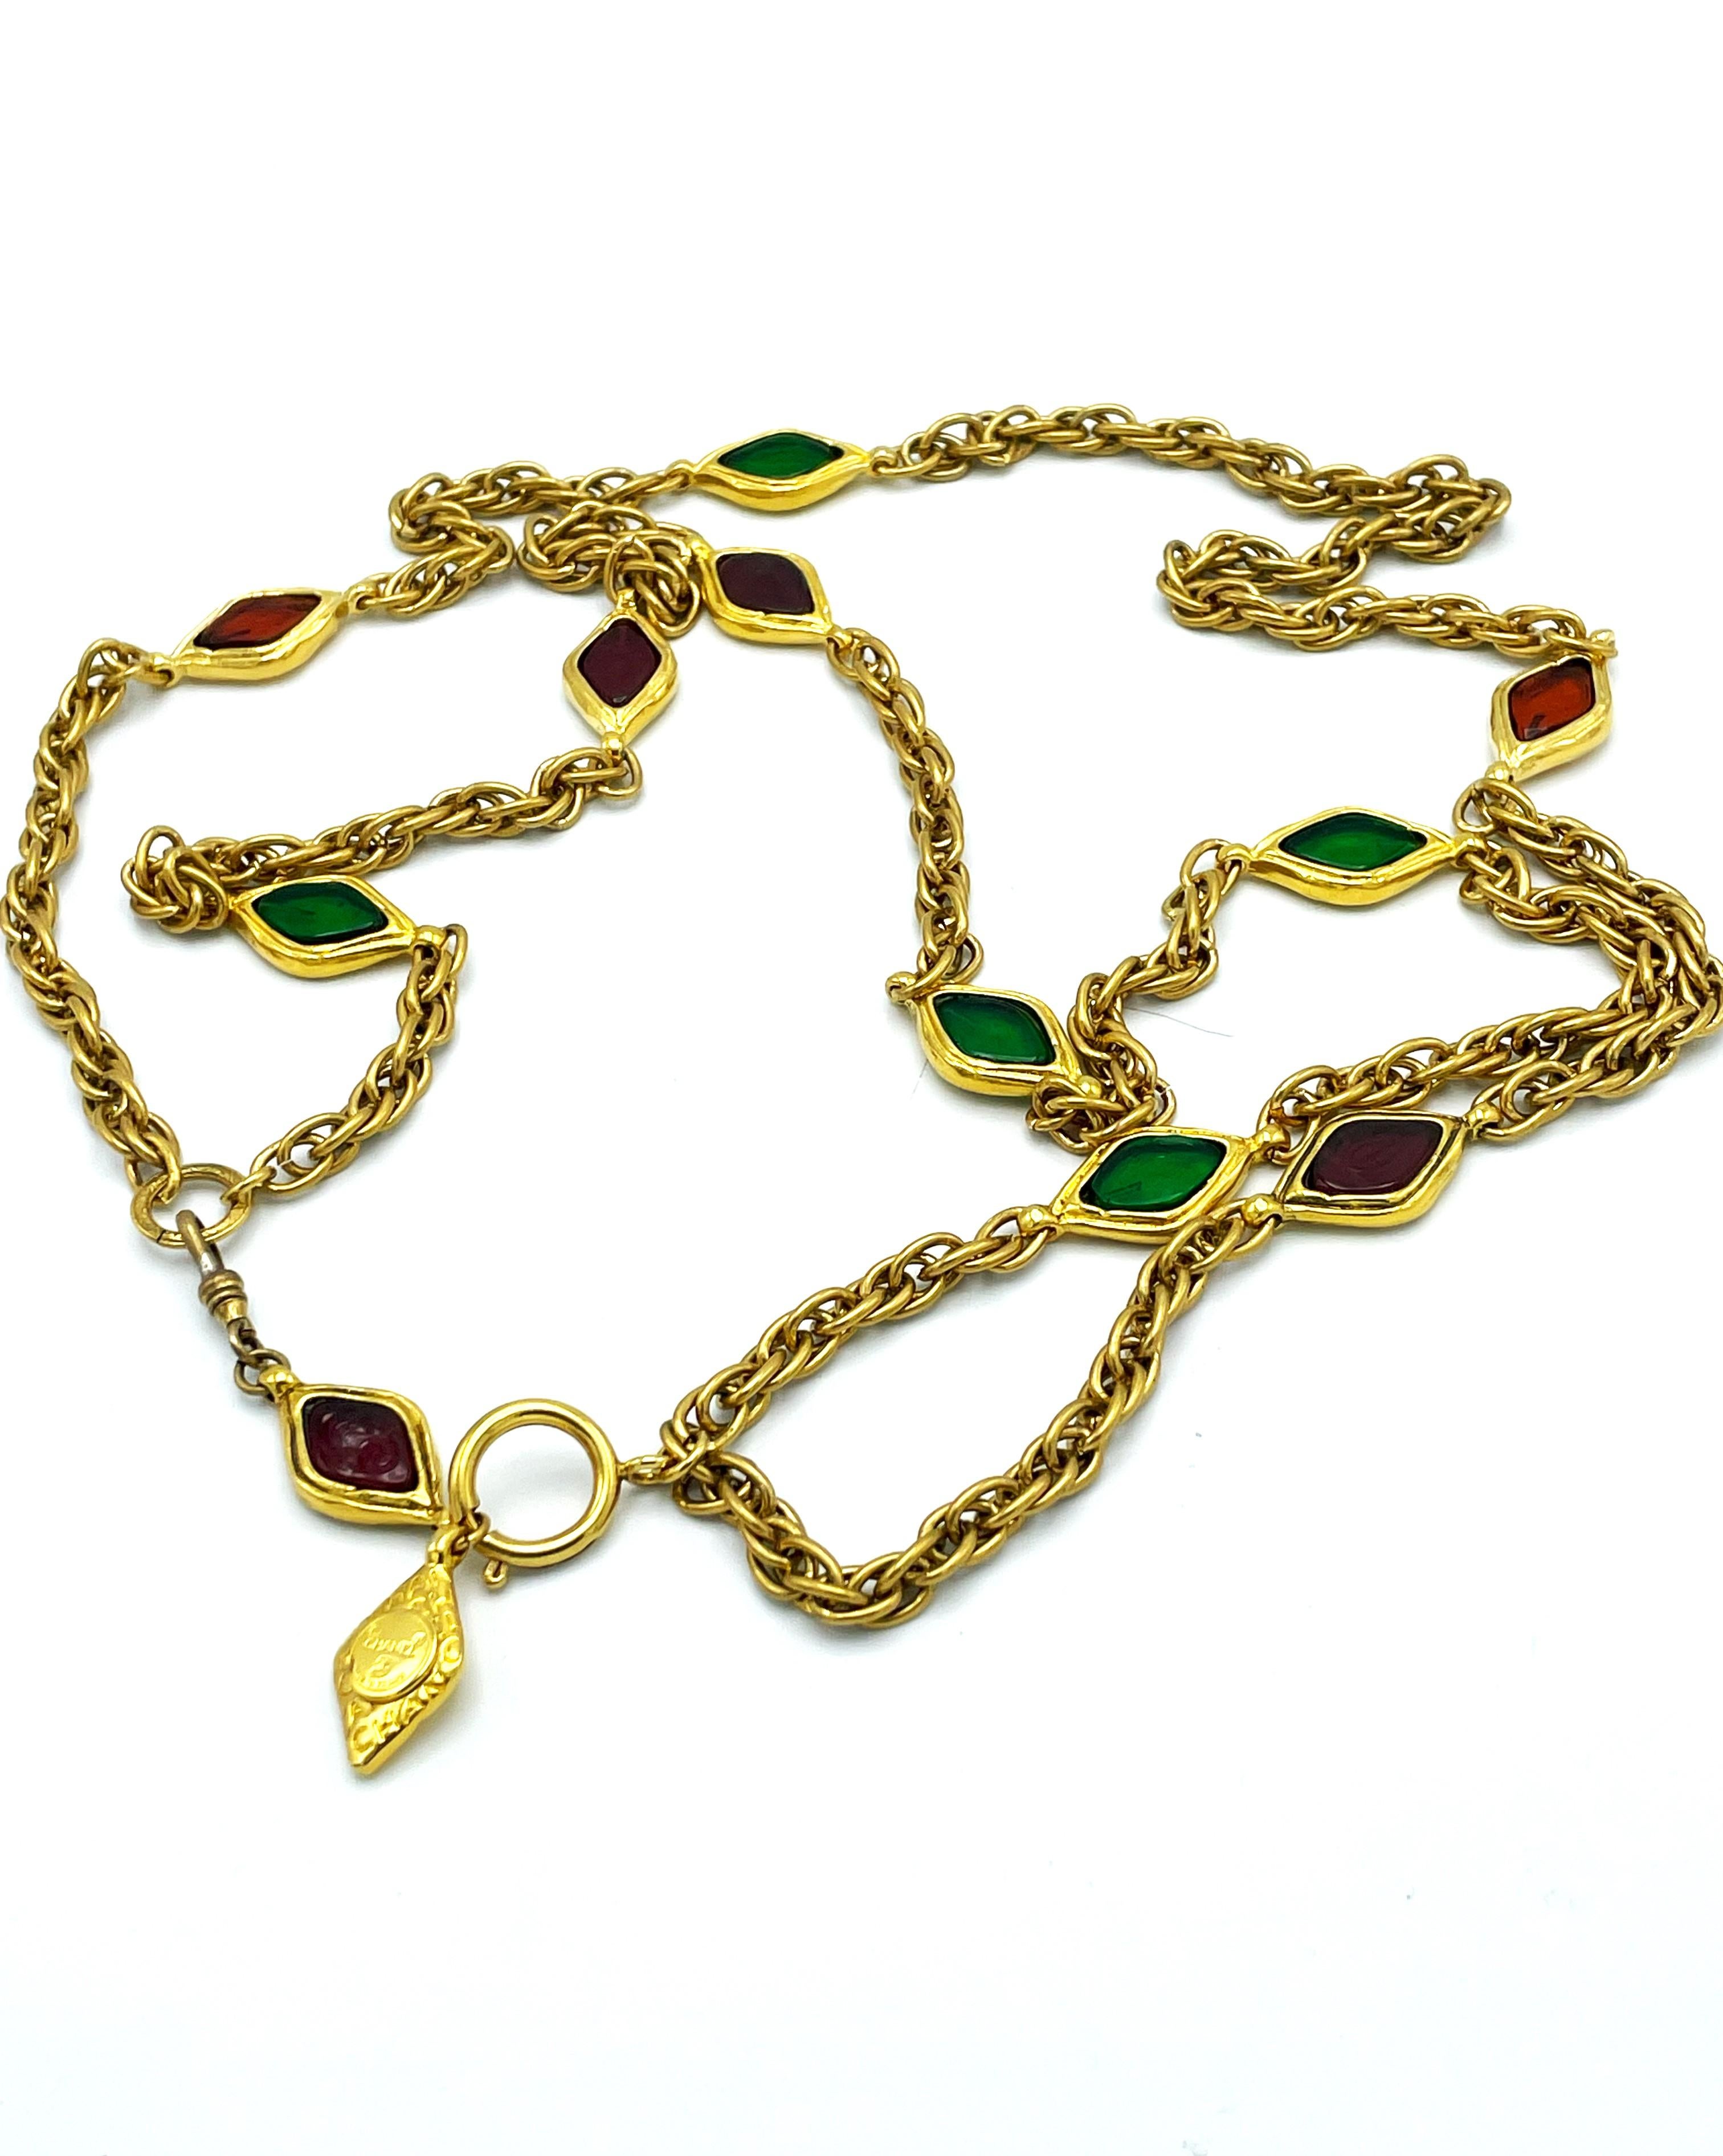  2 row Chanel necklace with red and green pate the verre, gold plated, 1970/80's For Sale 2